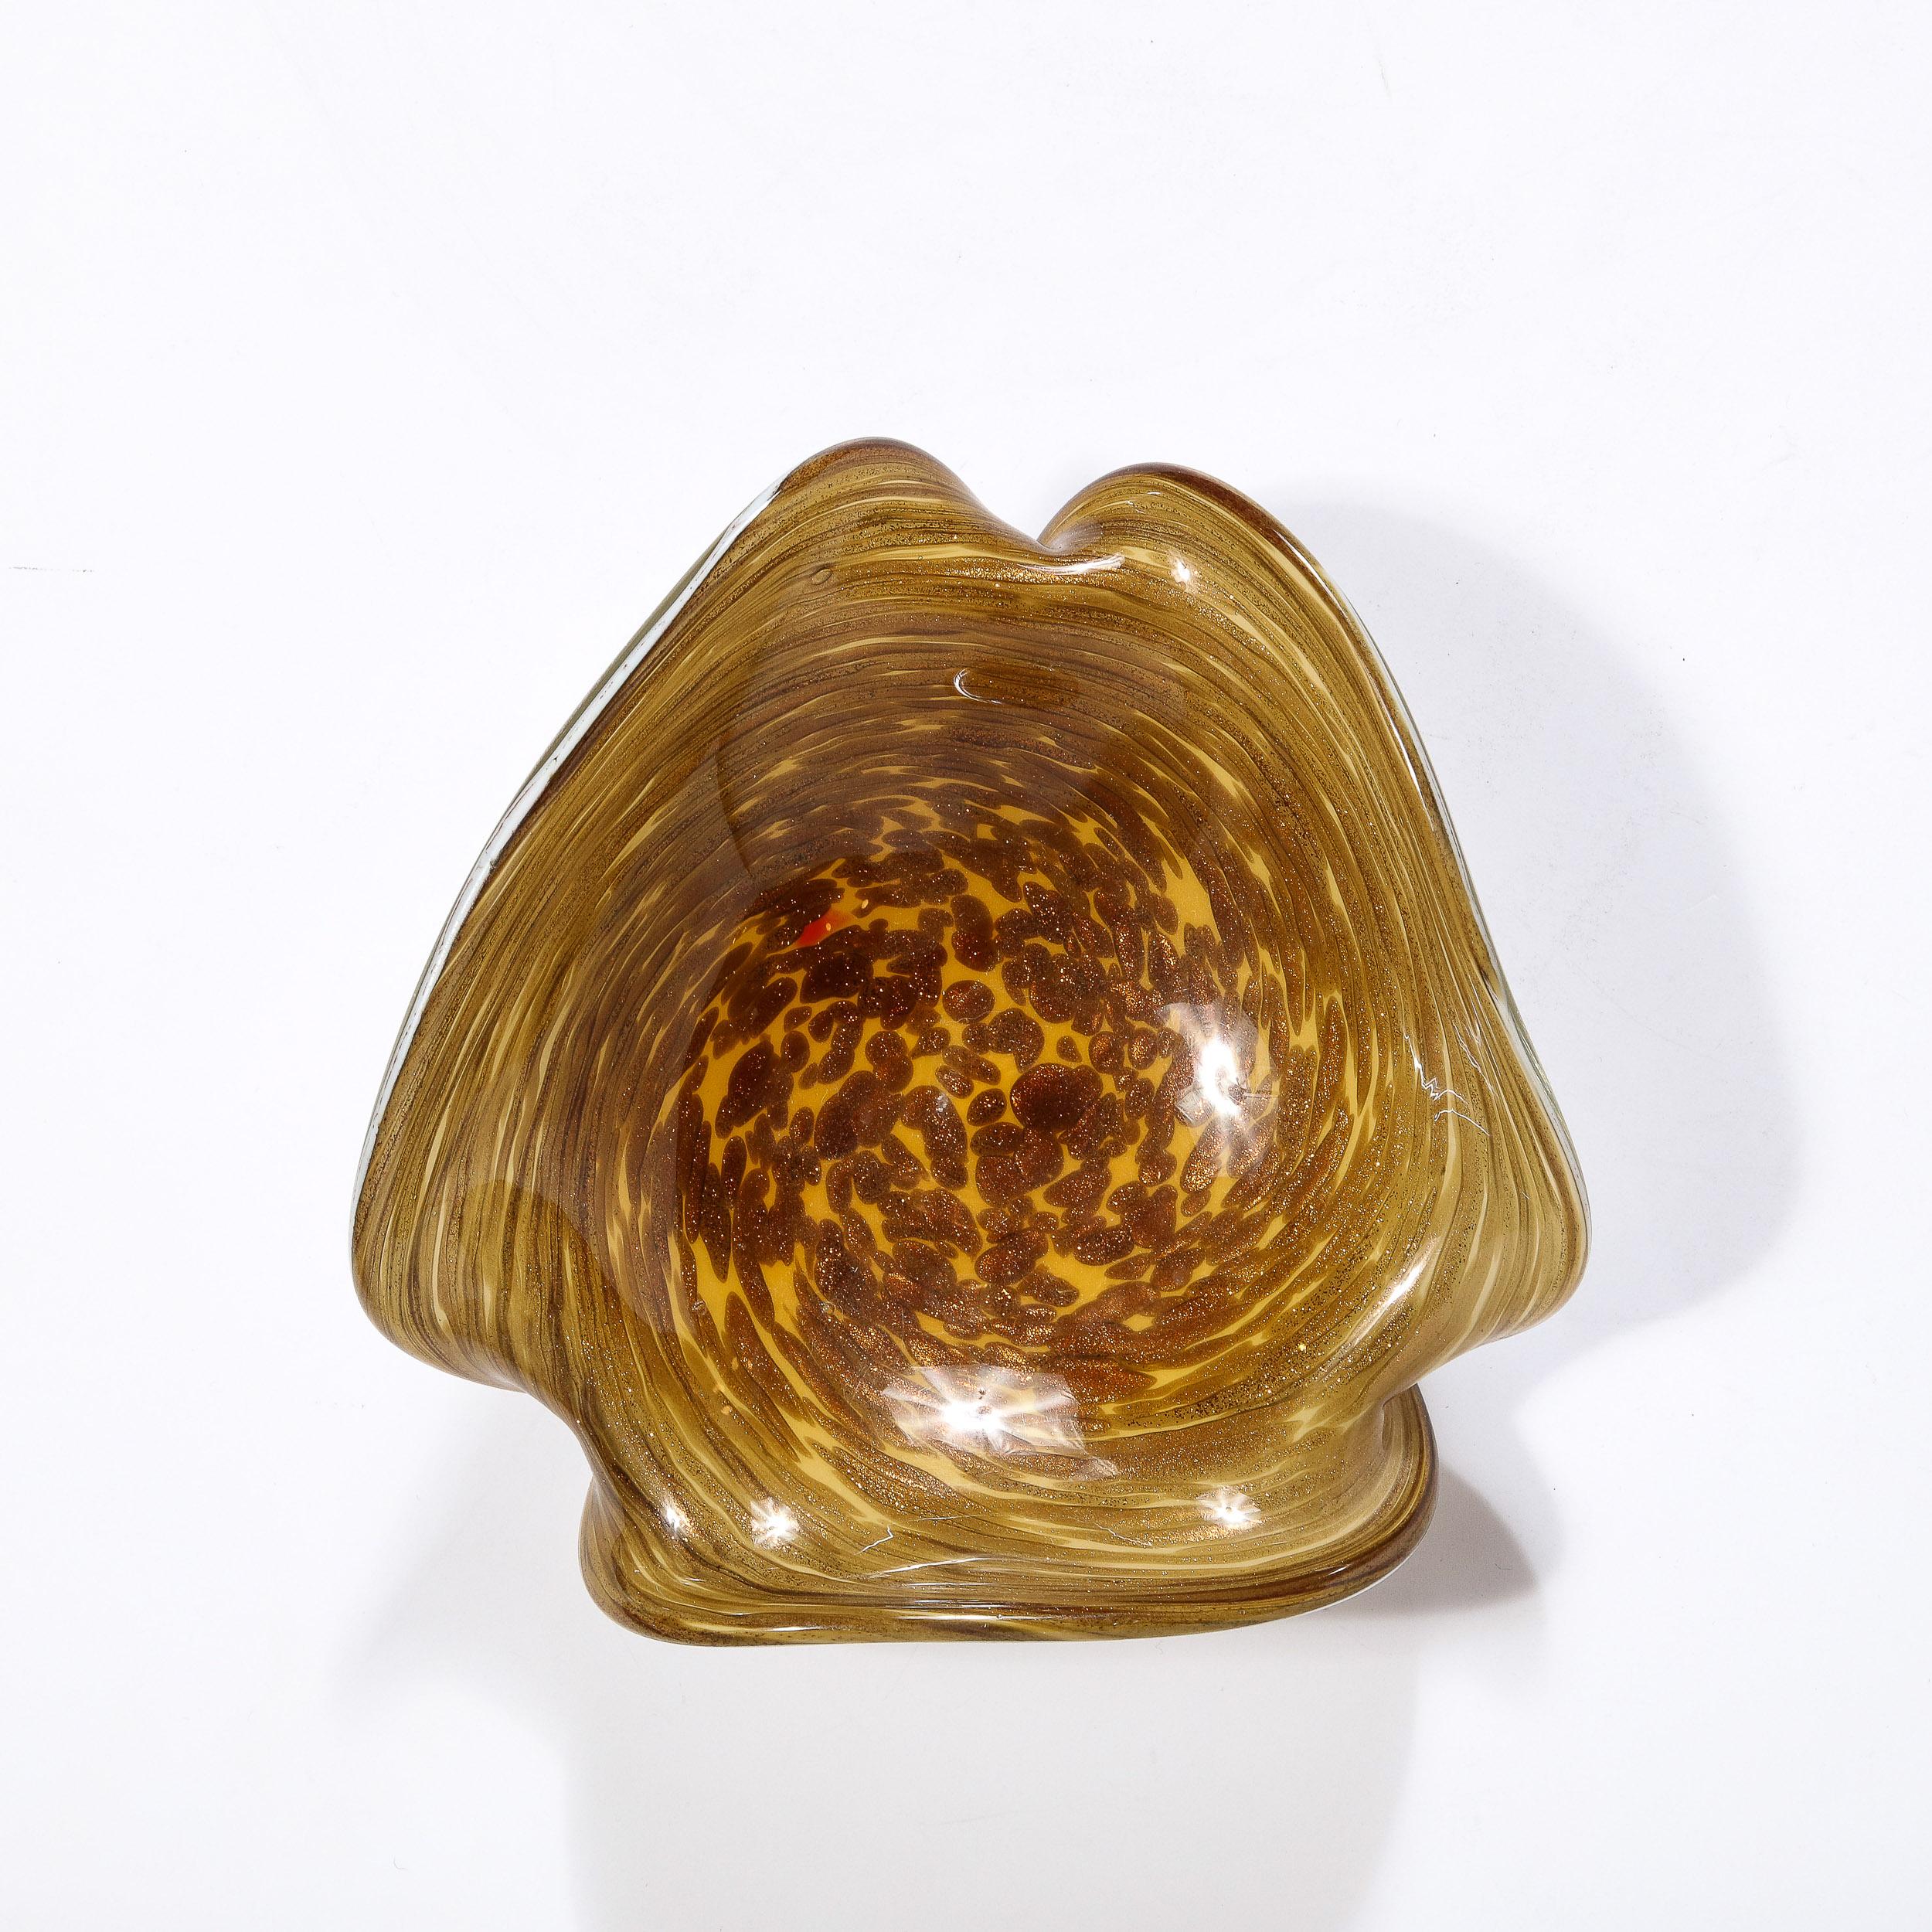 This beautiful Mid-Century Modernist Hand-Blown Murano Glass Dish Originates from Italy, Circa 1950. Featuring beautiful hues of Yellow Ocre that spiral within lighter tones to create unique and dynamic moments characteristic of Hand-Blown Glass.